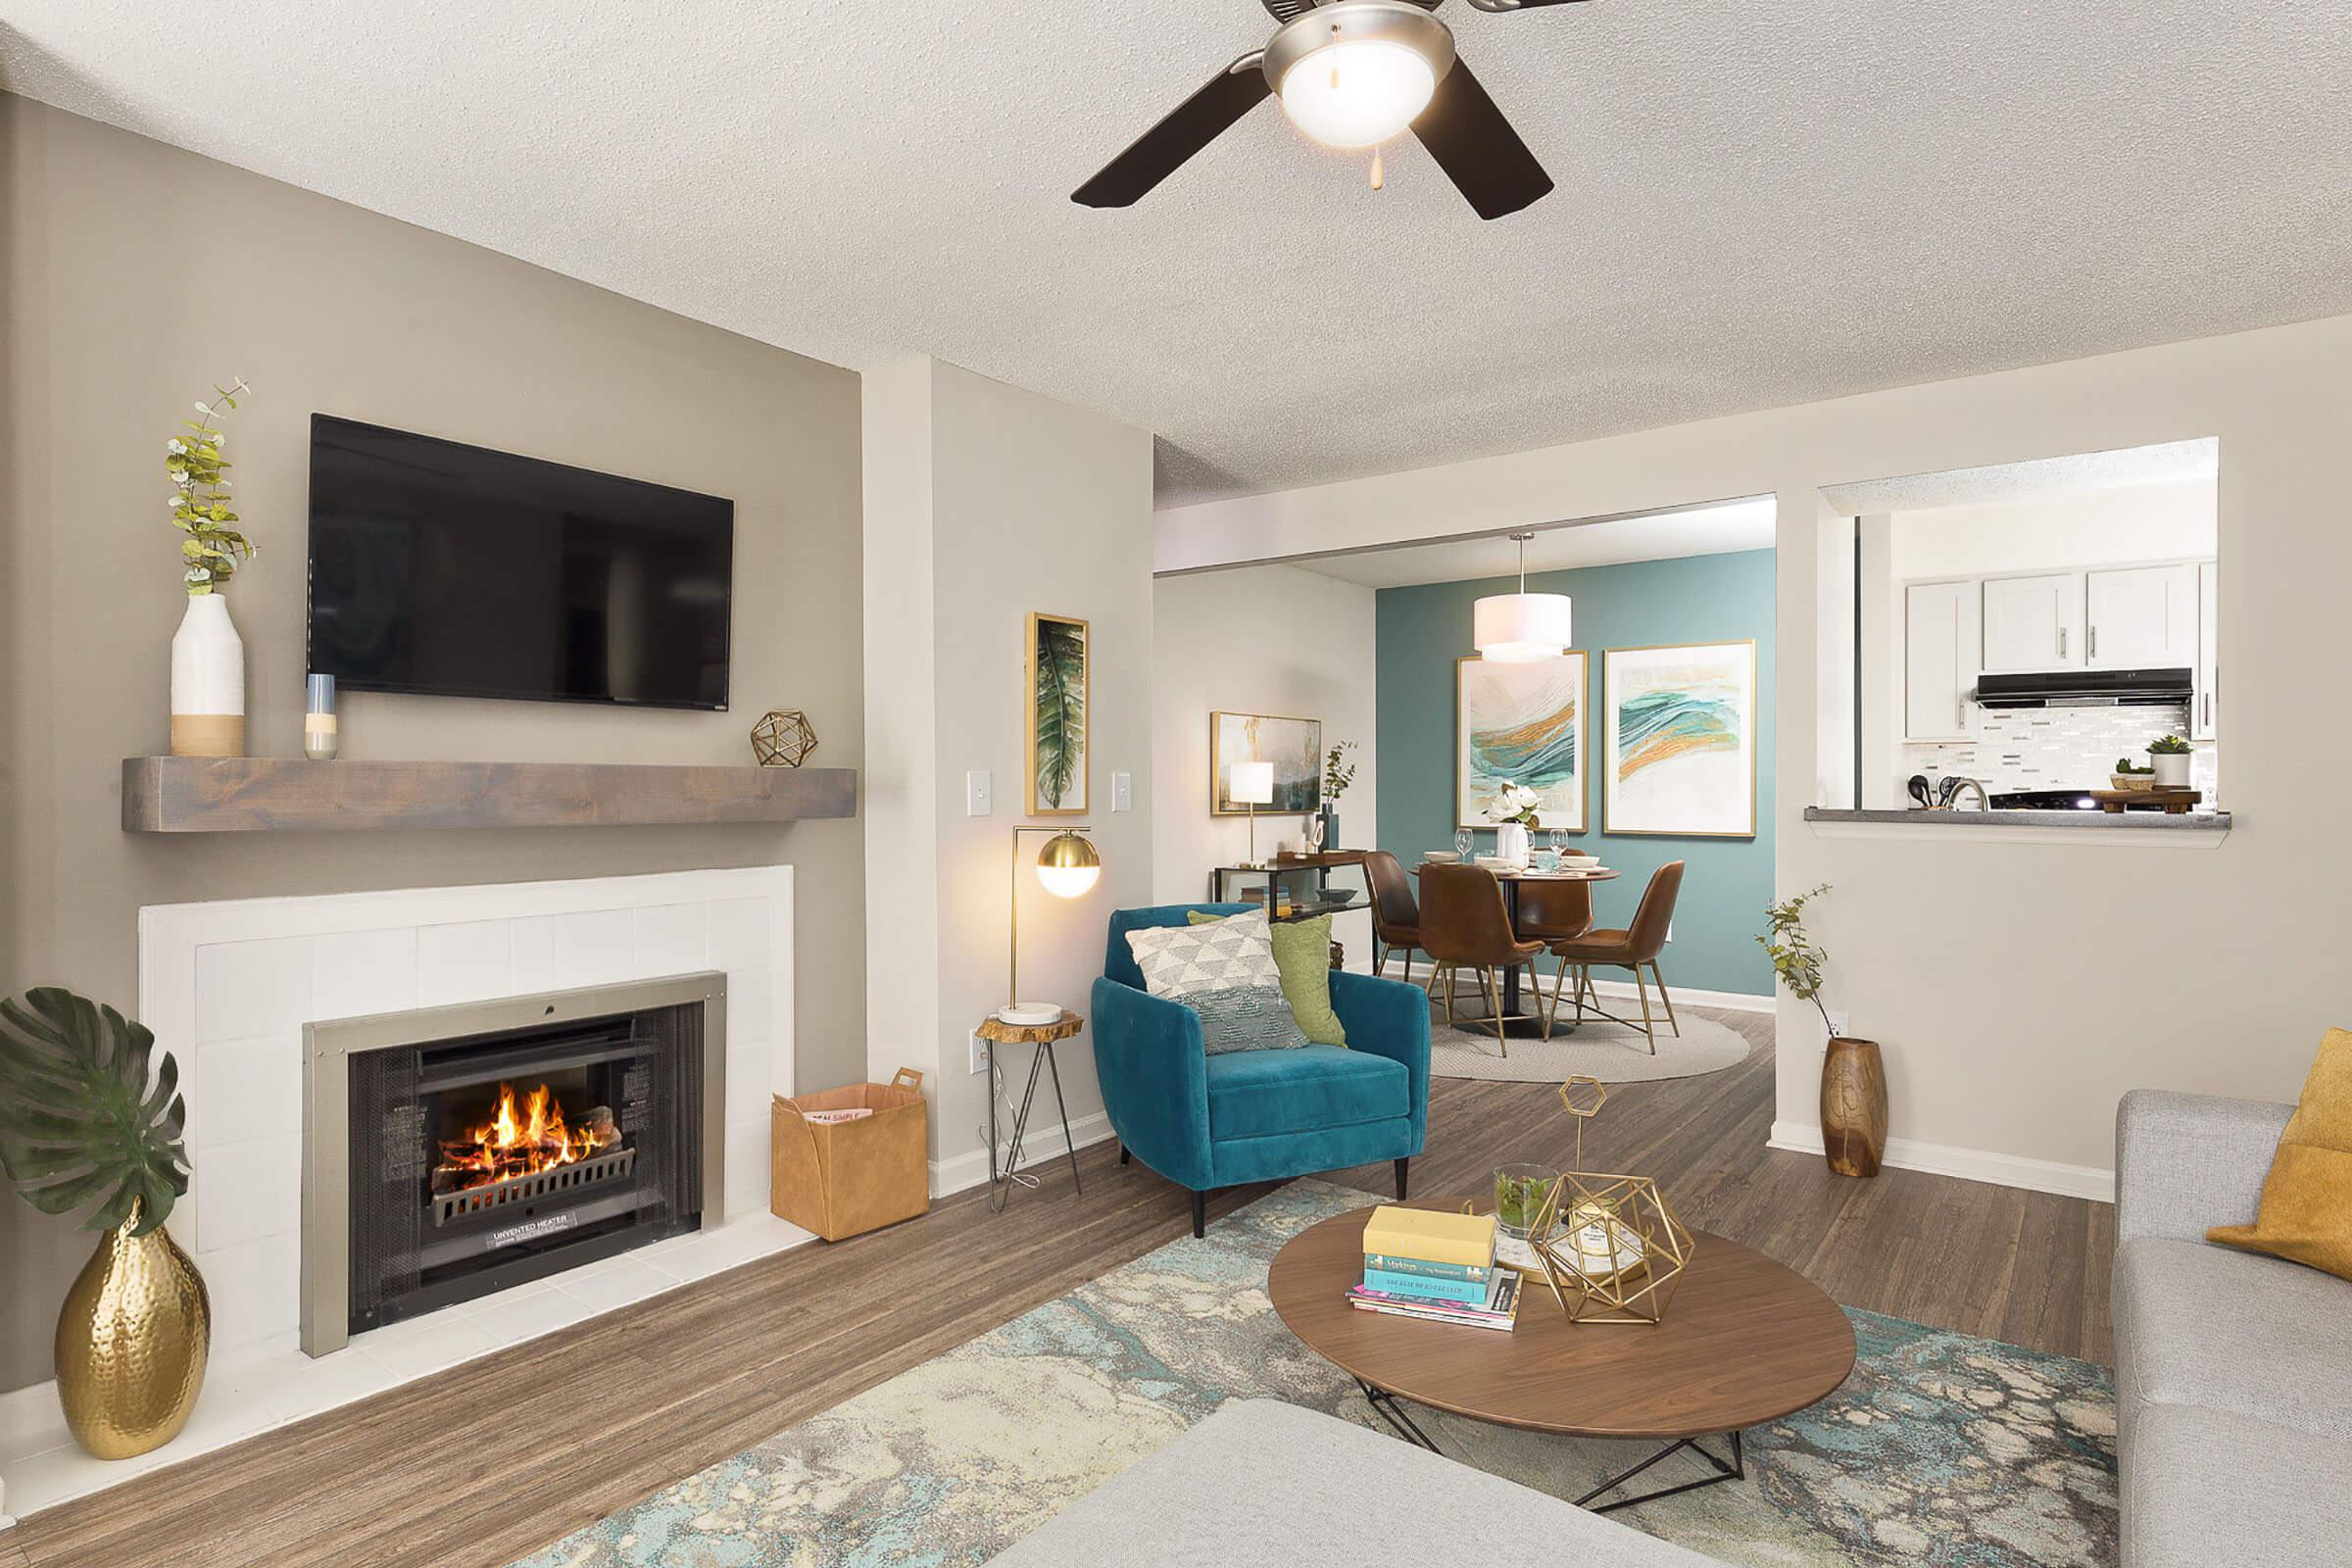 Living Room with Gas Fireplace with Mantle - Huntsview Apartments - Greensboro - North Carolina